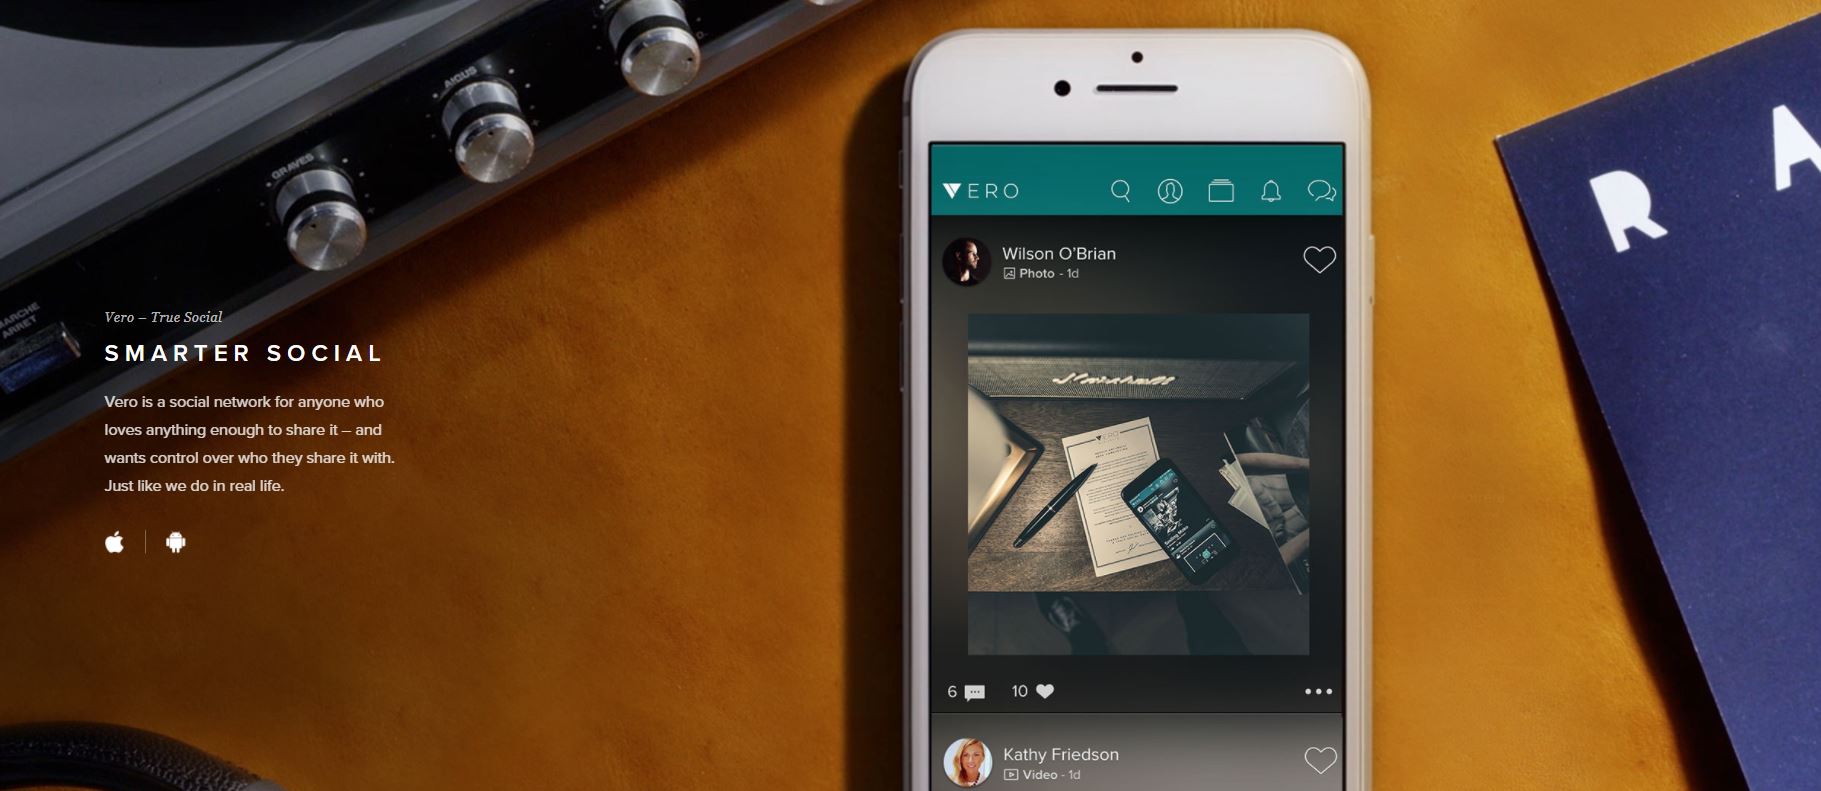 So, you want to start a social network? How Vero went from hero to zero in under a week